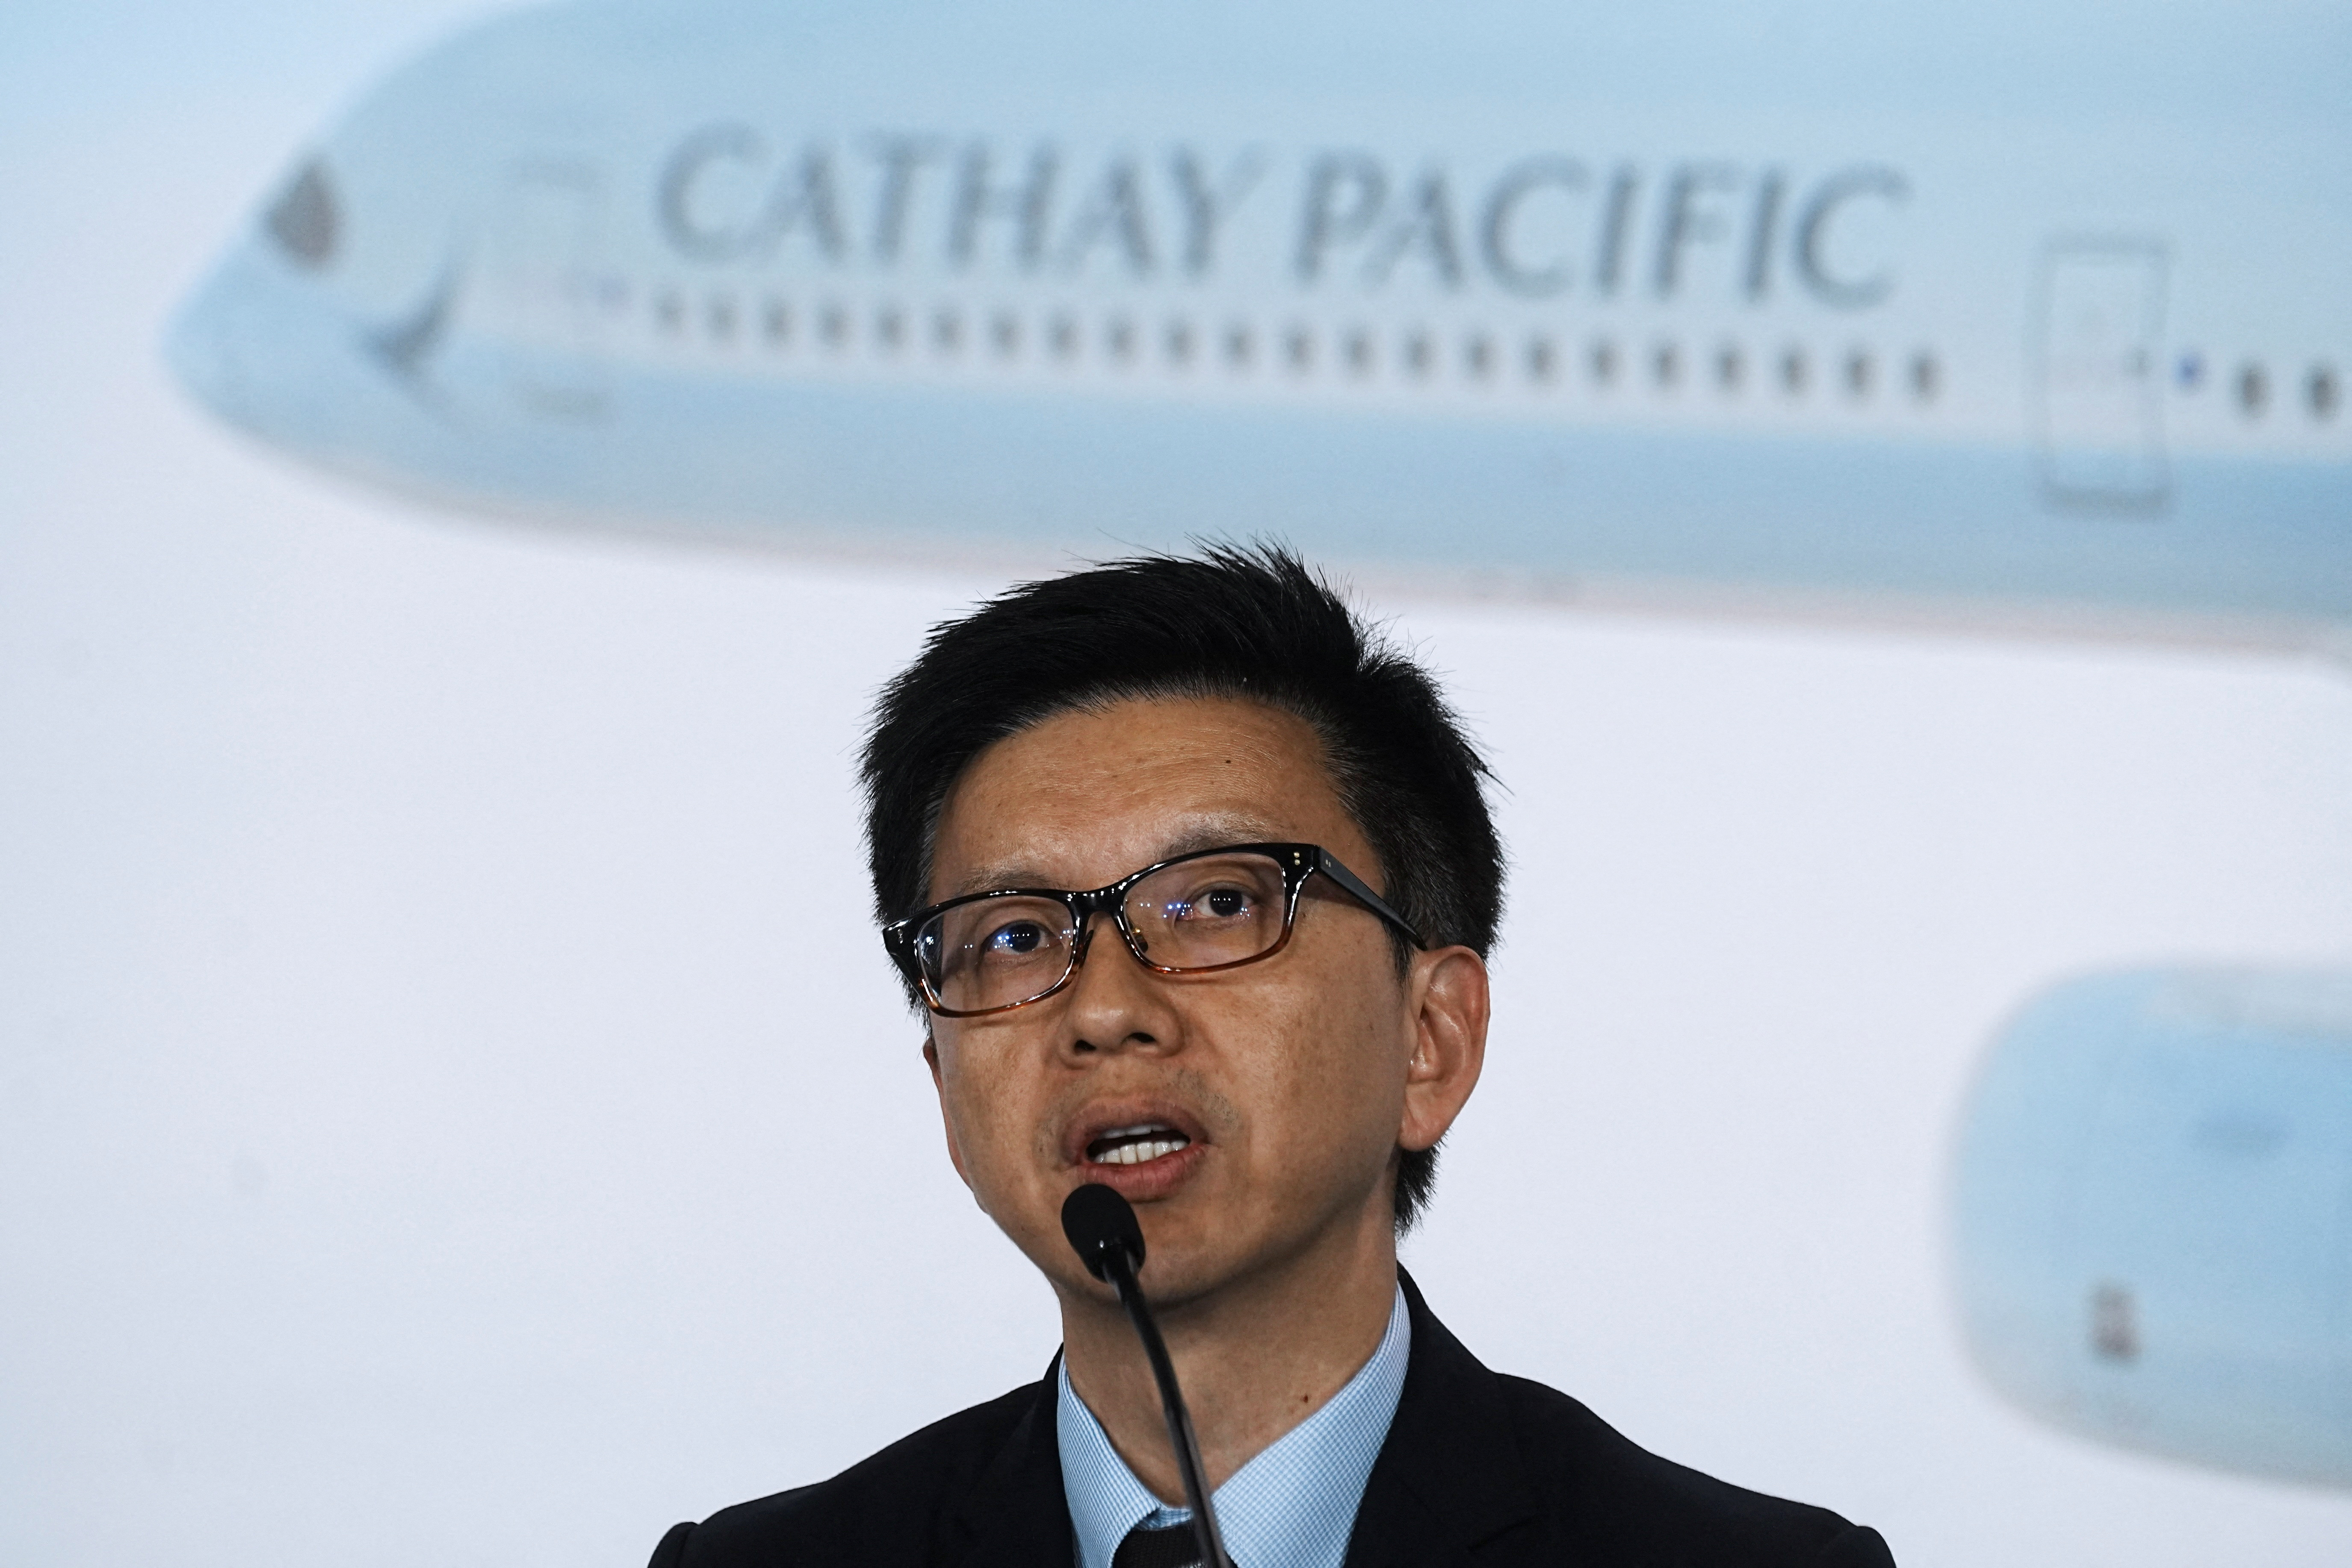 Cathay Pacific Airways Chief Executive Officer Ronald Lam speaks during a news conference in Hong Kong